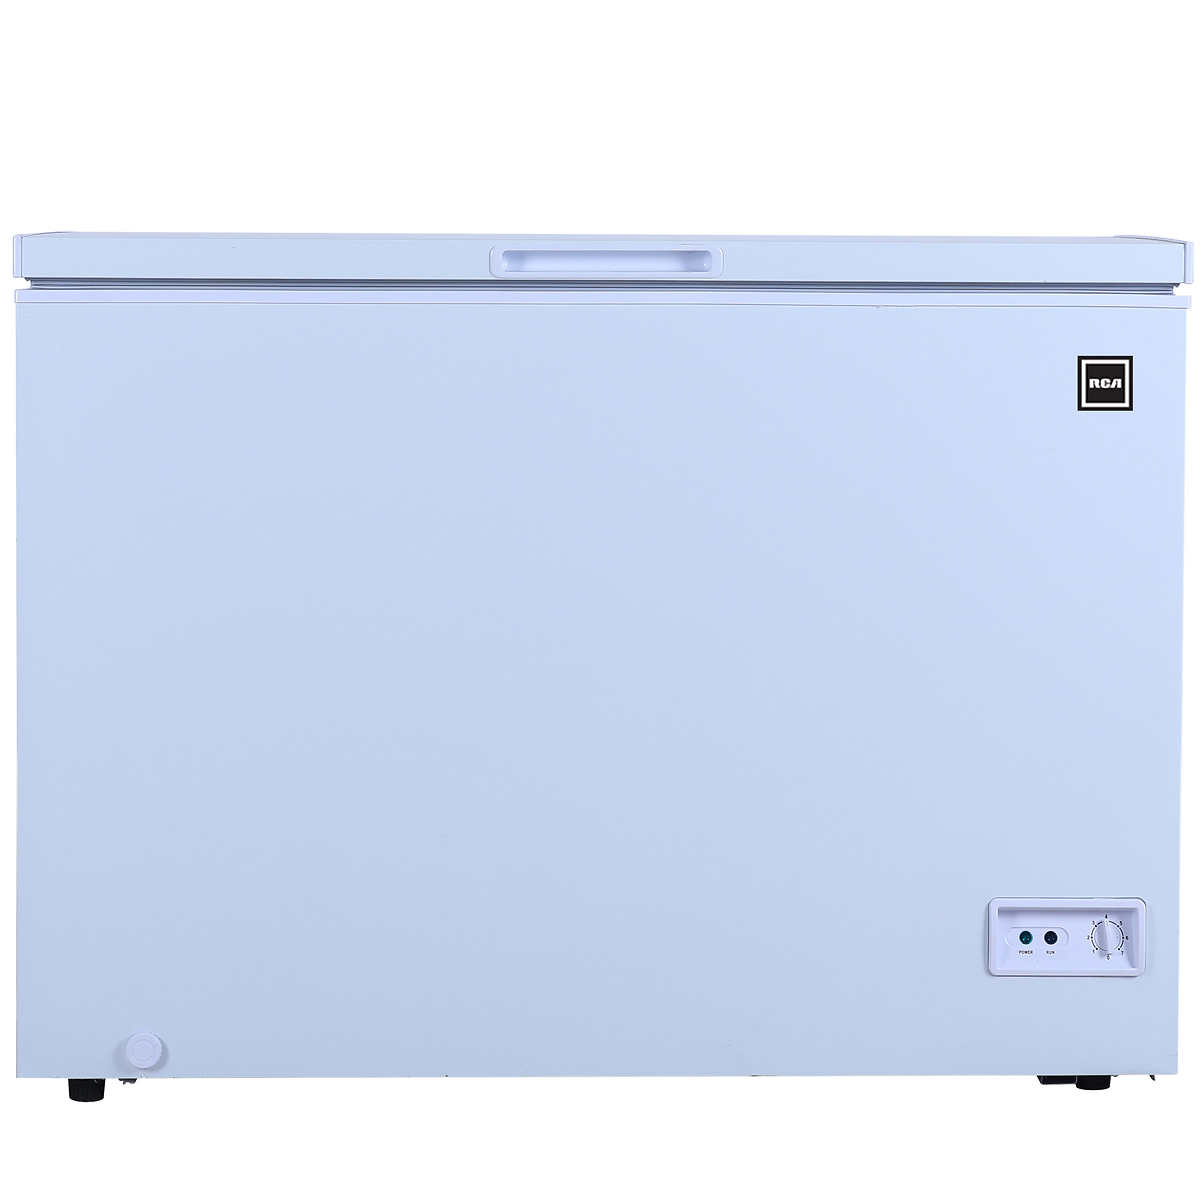 Small chest freezer that rolls out underneath countertop. Locks in place  while driving. Thermostat changed so that it can be used as a refrigerator  or freezer. Cold air stays in when lid